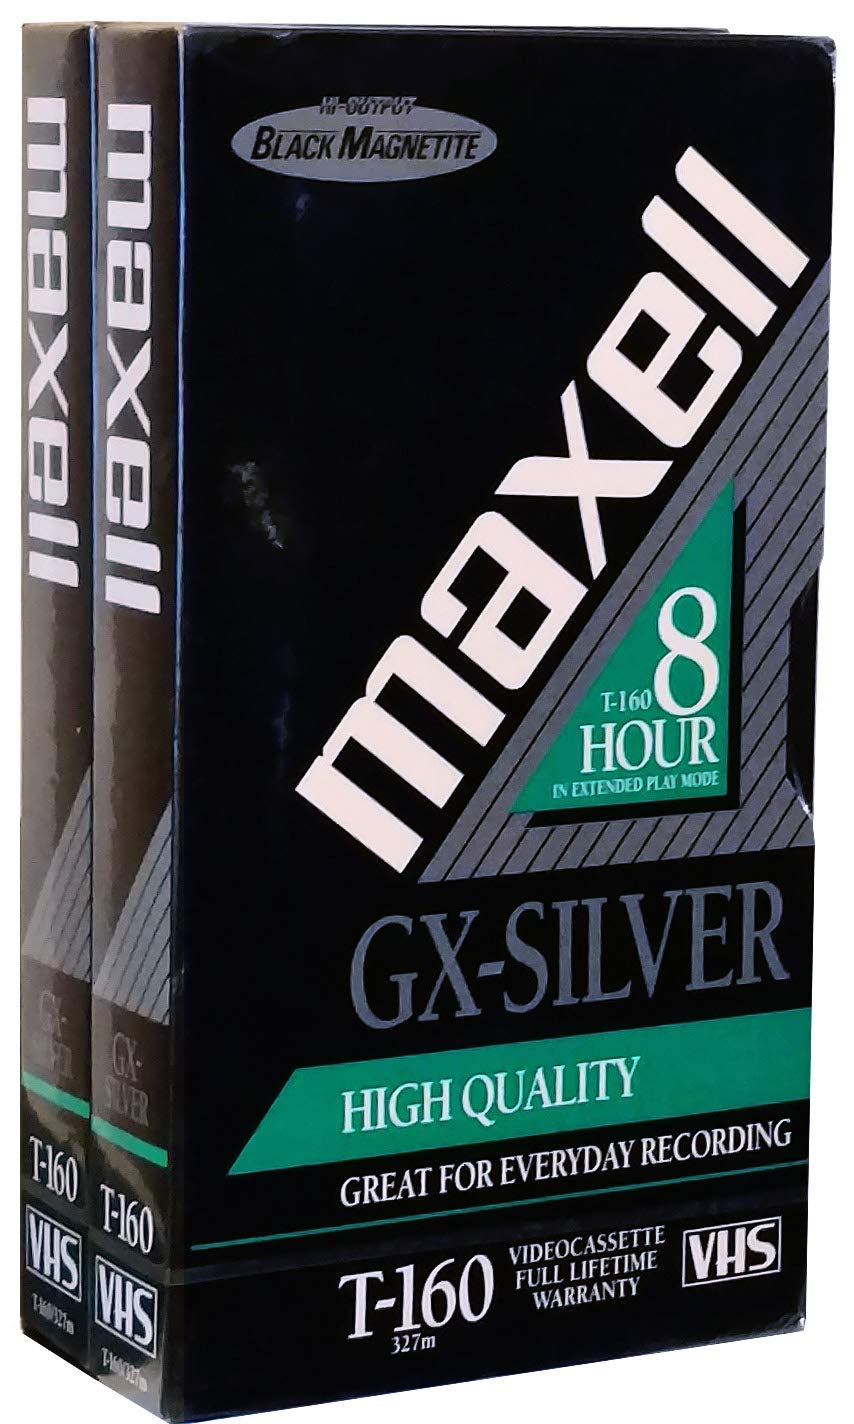 Maxell T-160 Gx-silver VHS Video Cassette Tape, Two Pack, 8 Hour Recording